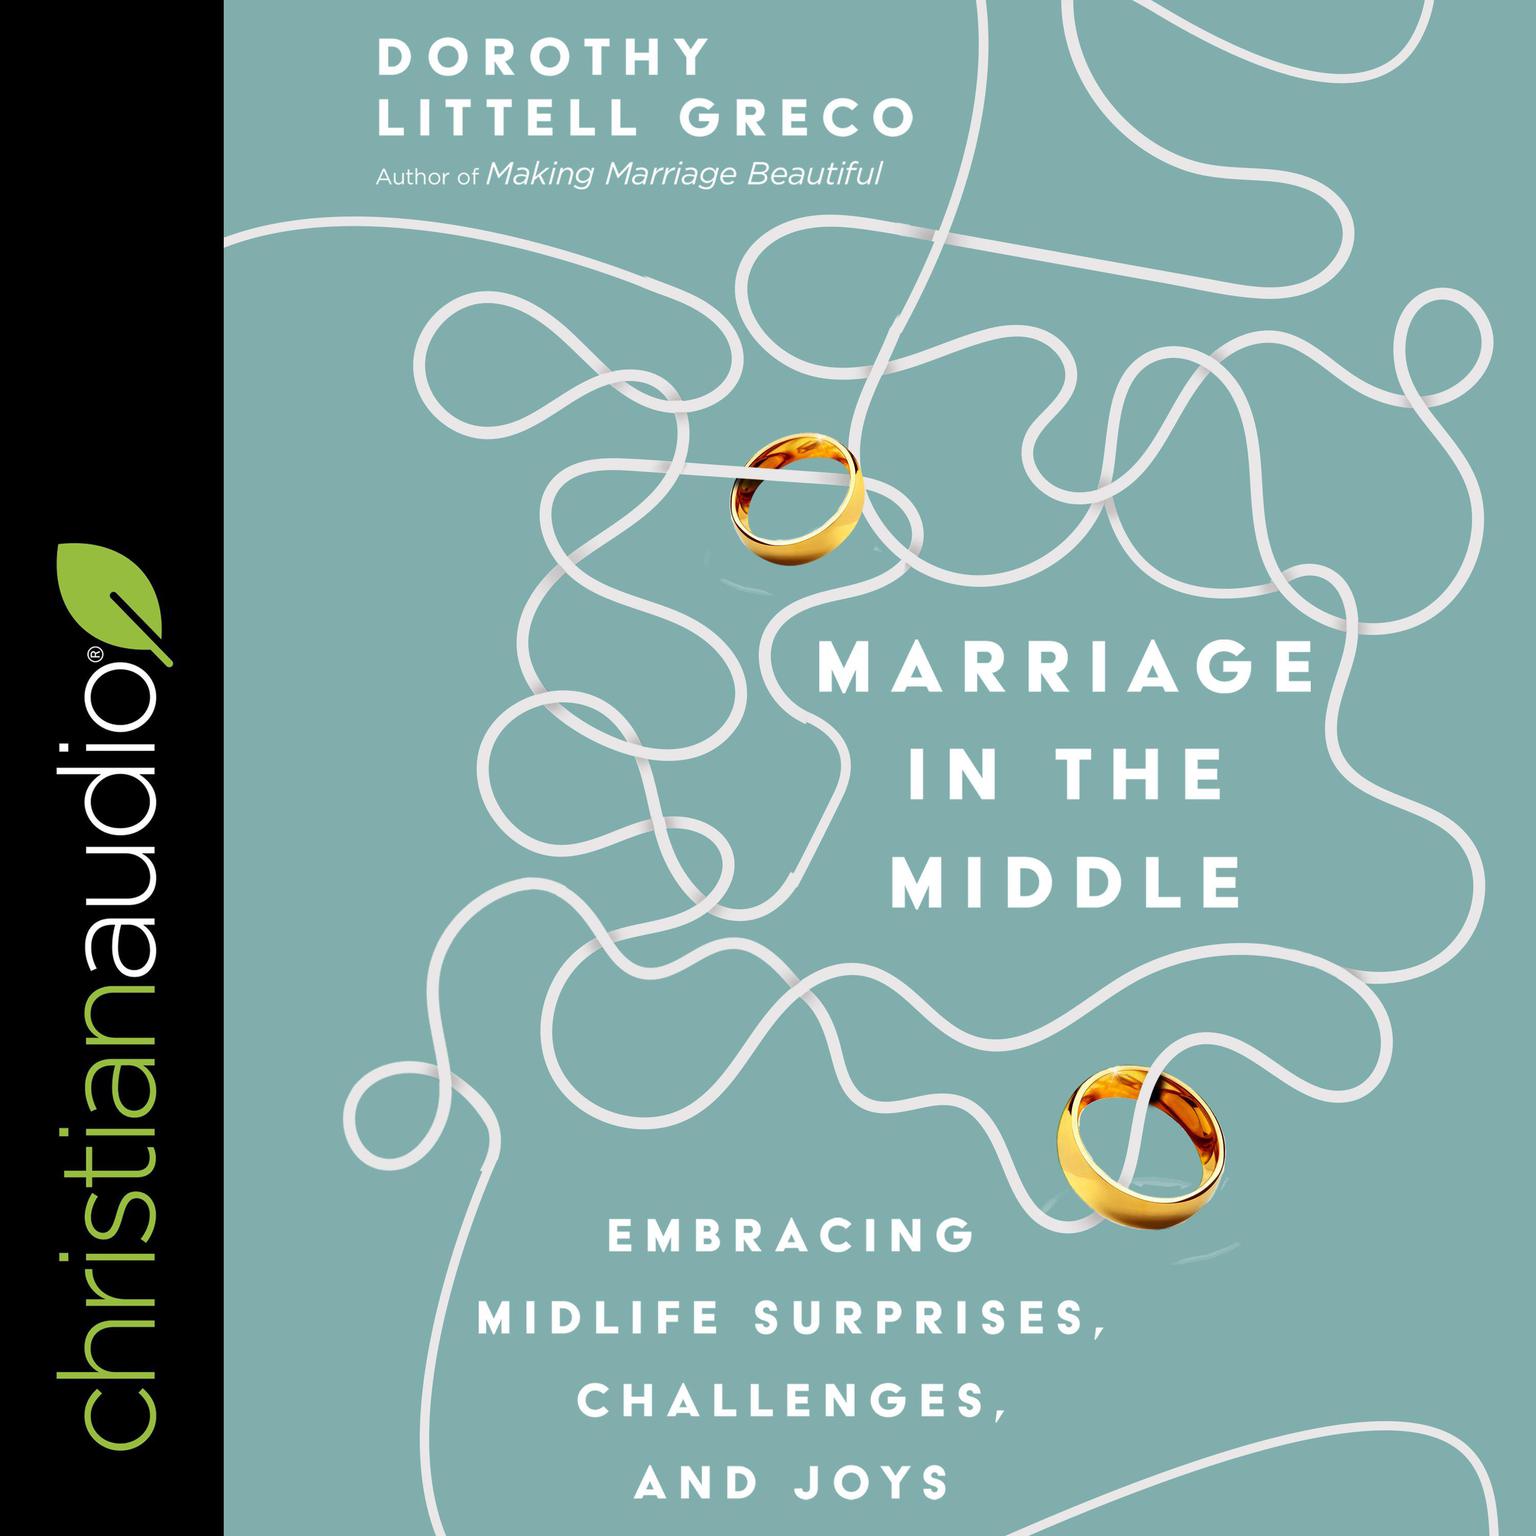 Marriage in the Middle: Embracing Midlife Surprises, Challenges, and Joys Audiobook, by Dorothy Littell Greco